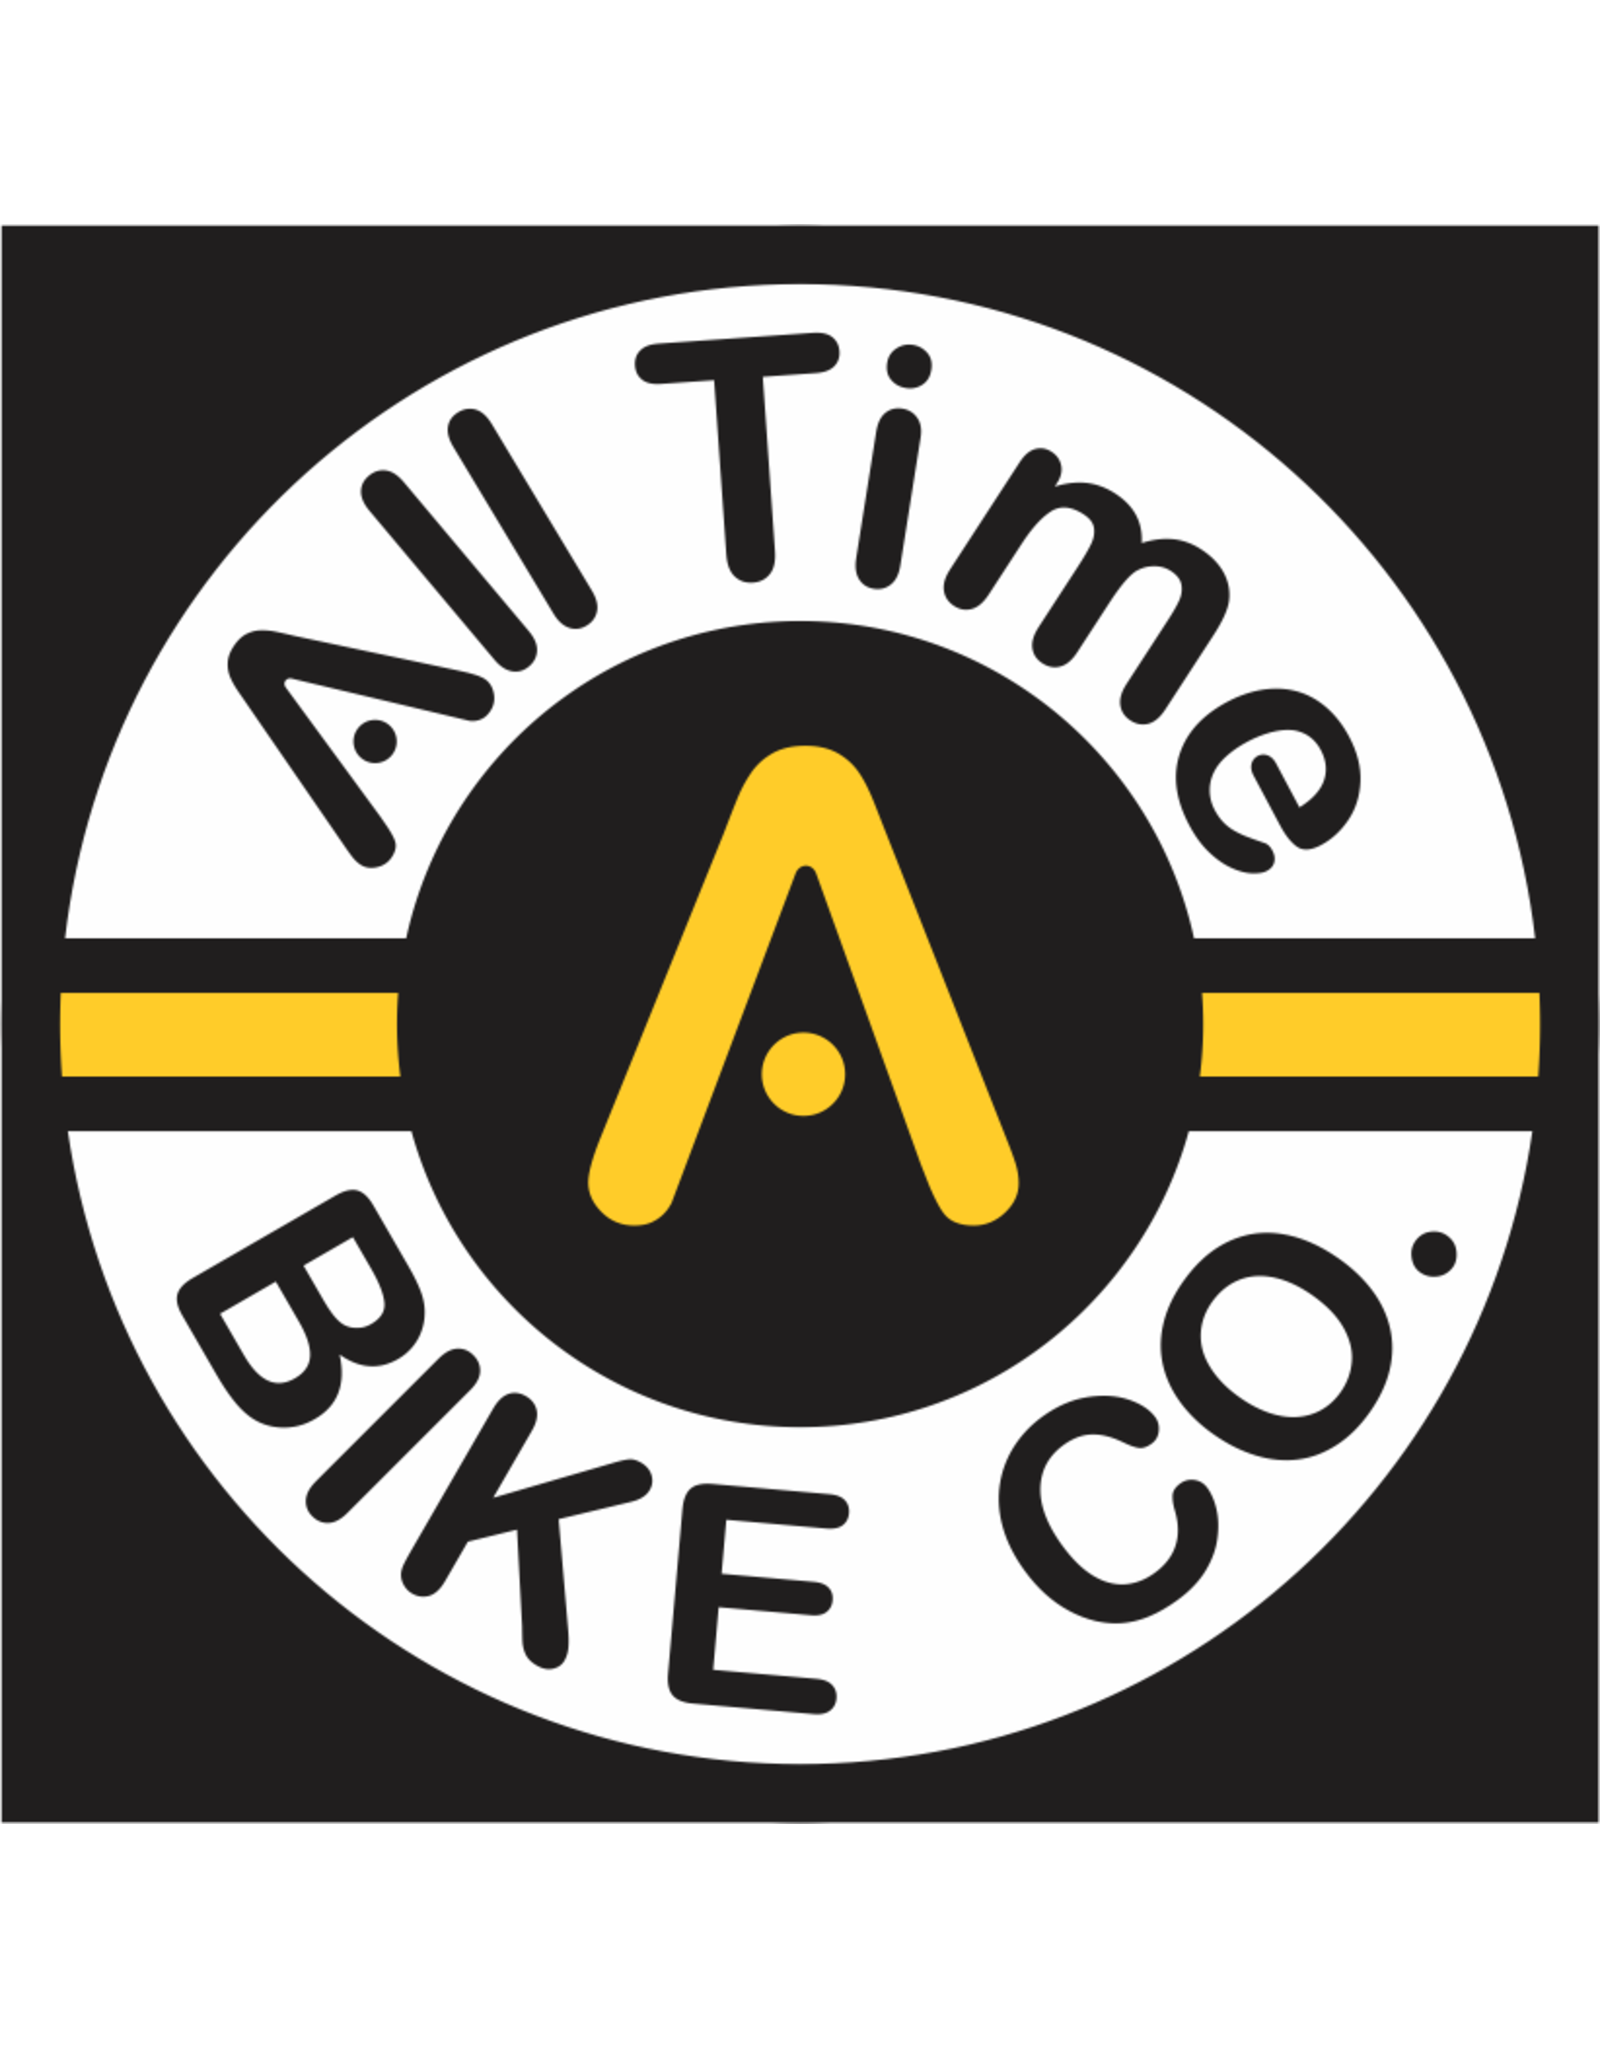 Atbco / All Time Bike Co. All Time / ATBCO Titanium water bottle cage